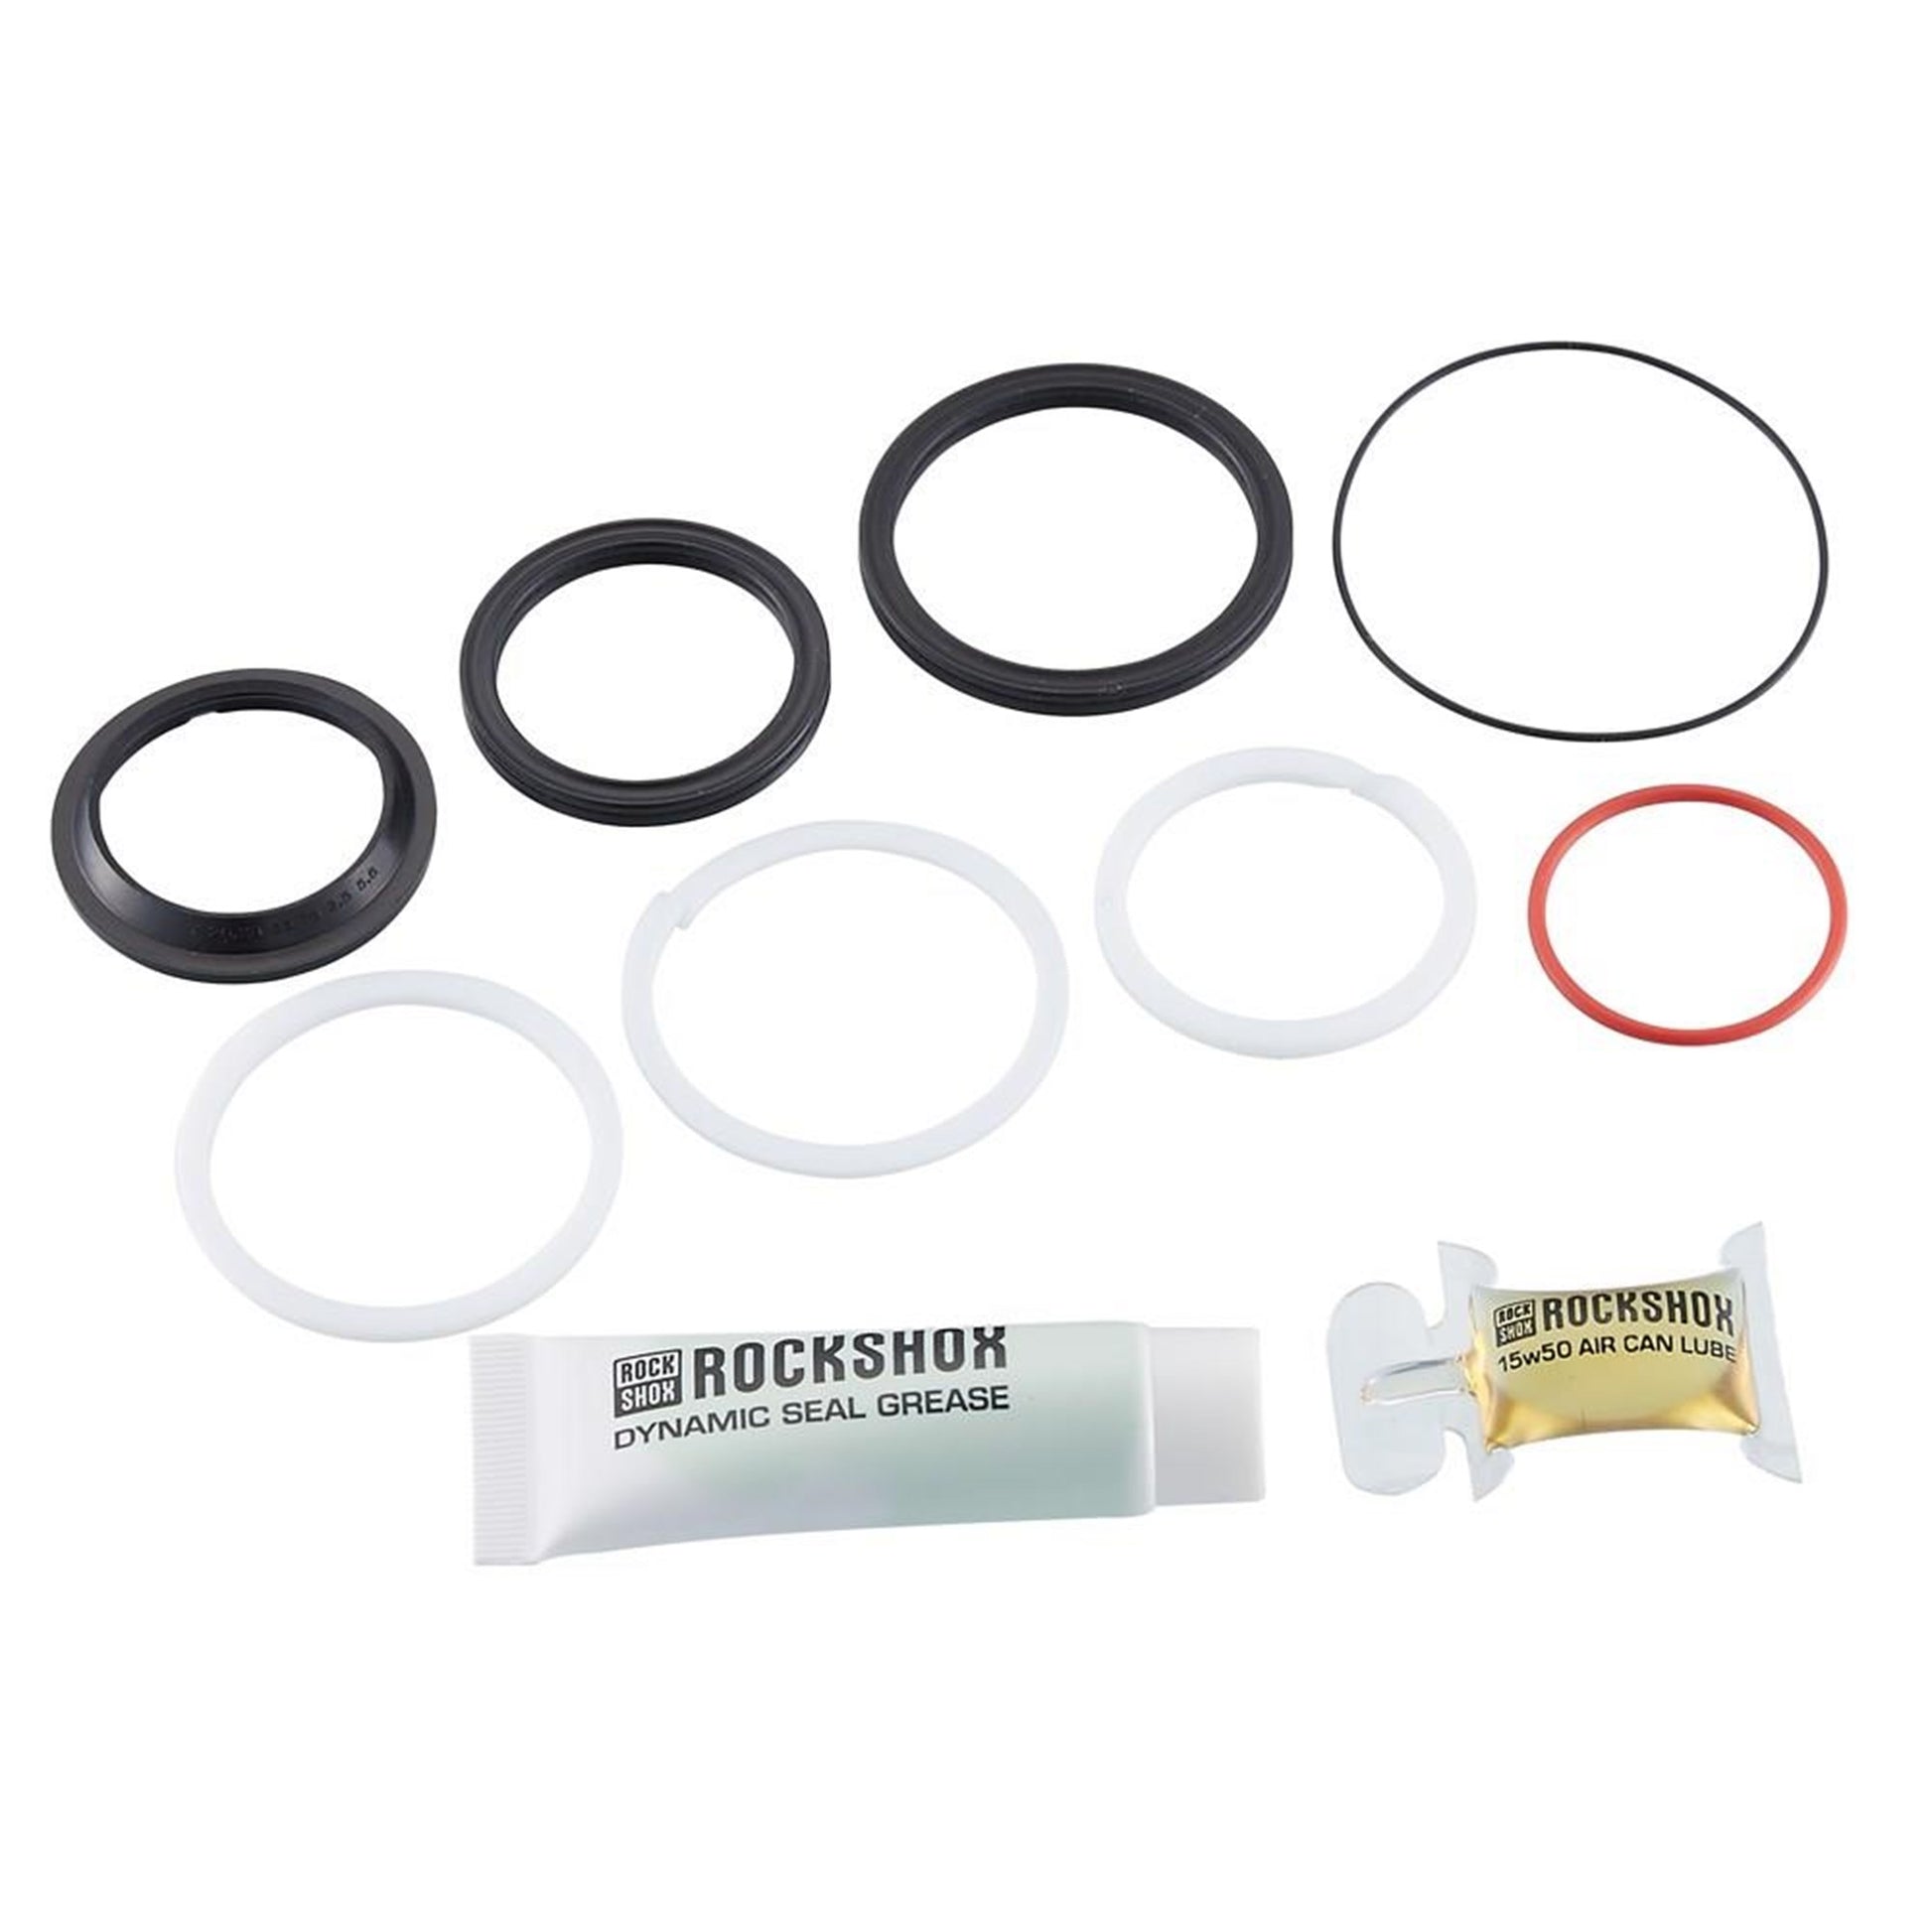 Rockshox Deluxe/Super Deluxe 50hr Air Can service kit 